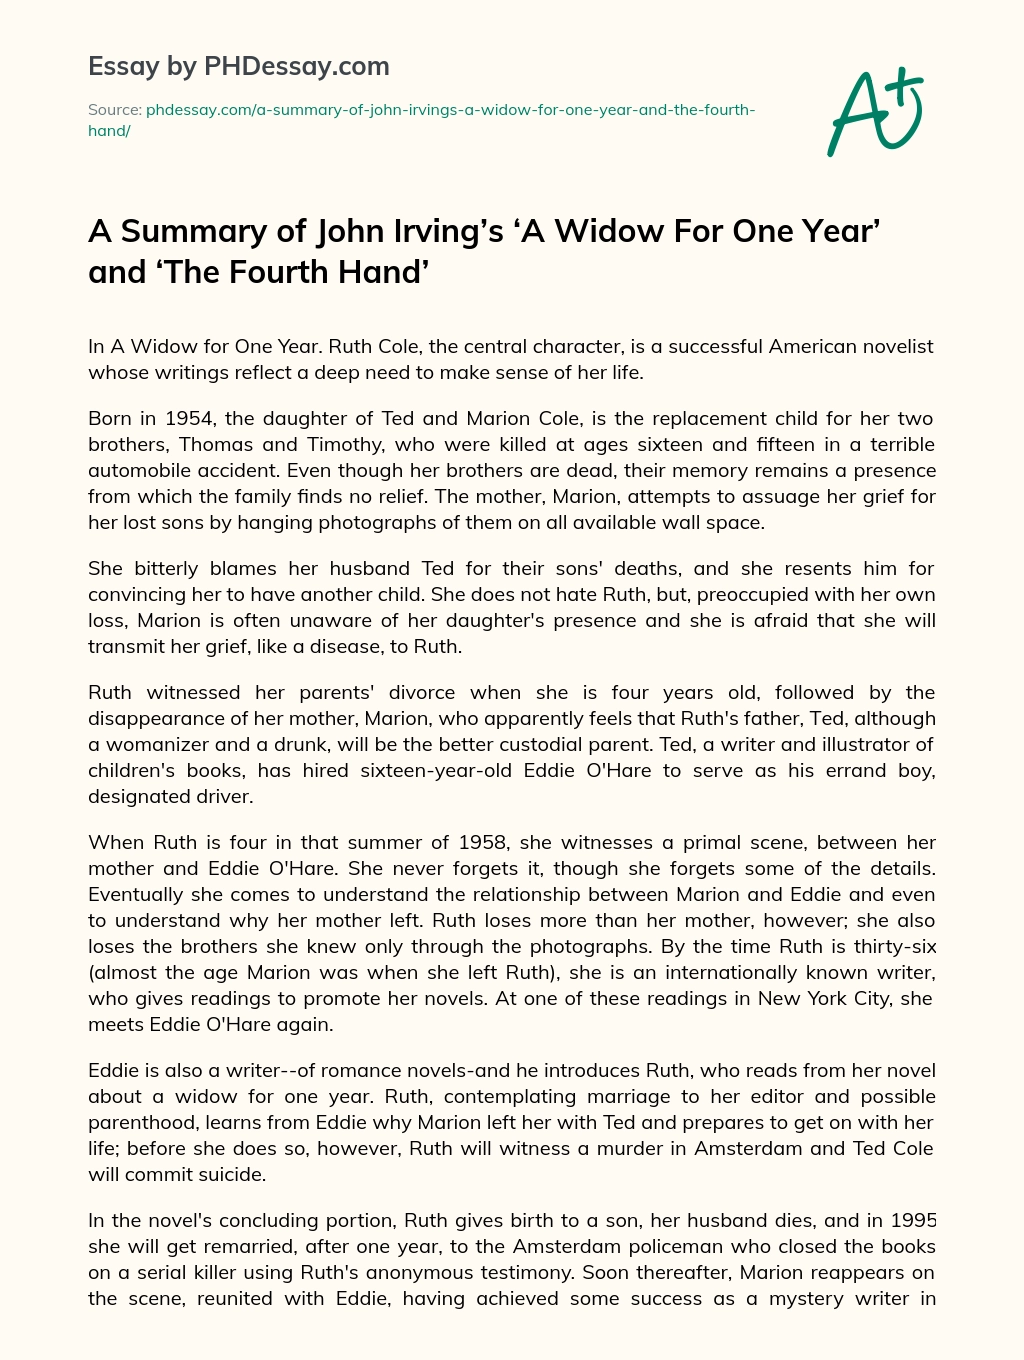 A Summary of John Irving’s  ‘A Widow For One Year’ and ‘The Fourth Hand’ essay